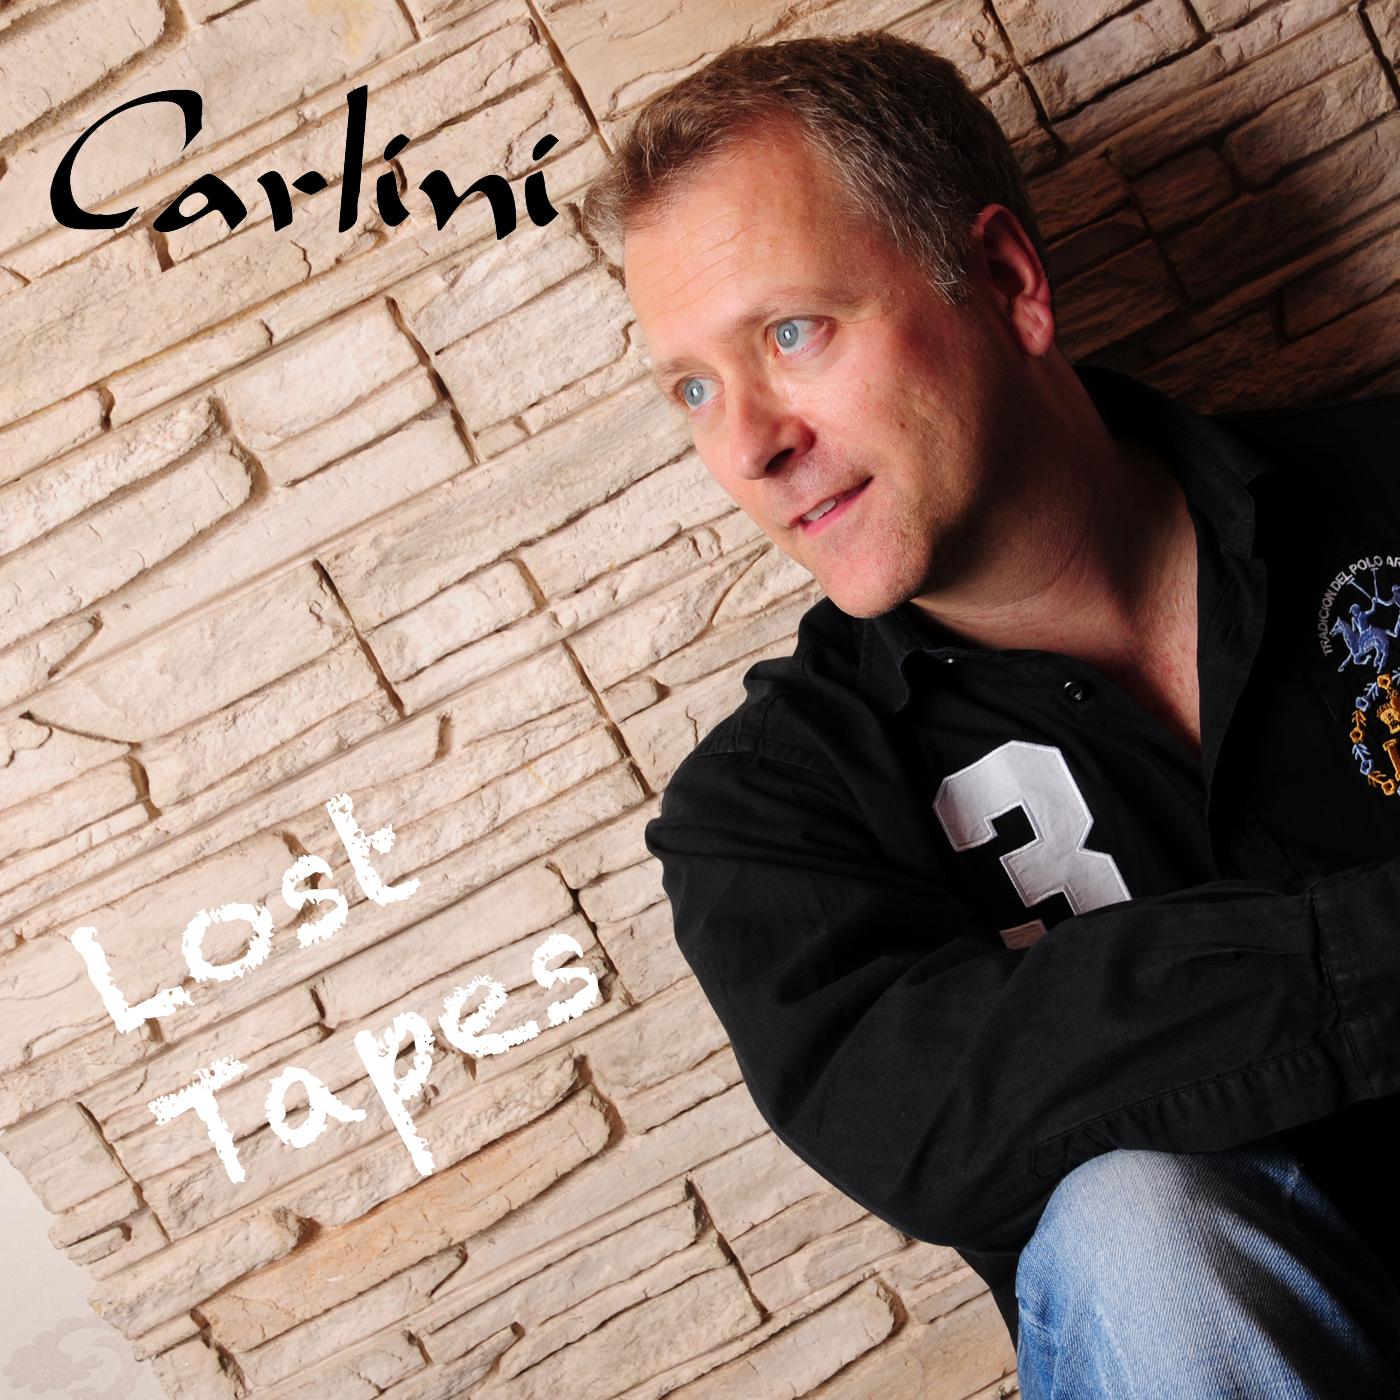 Carlini - You Can't Stop Loving You